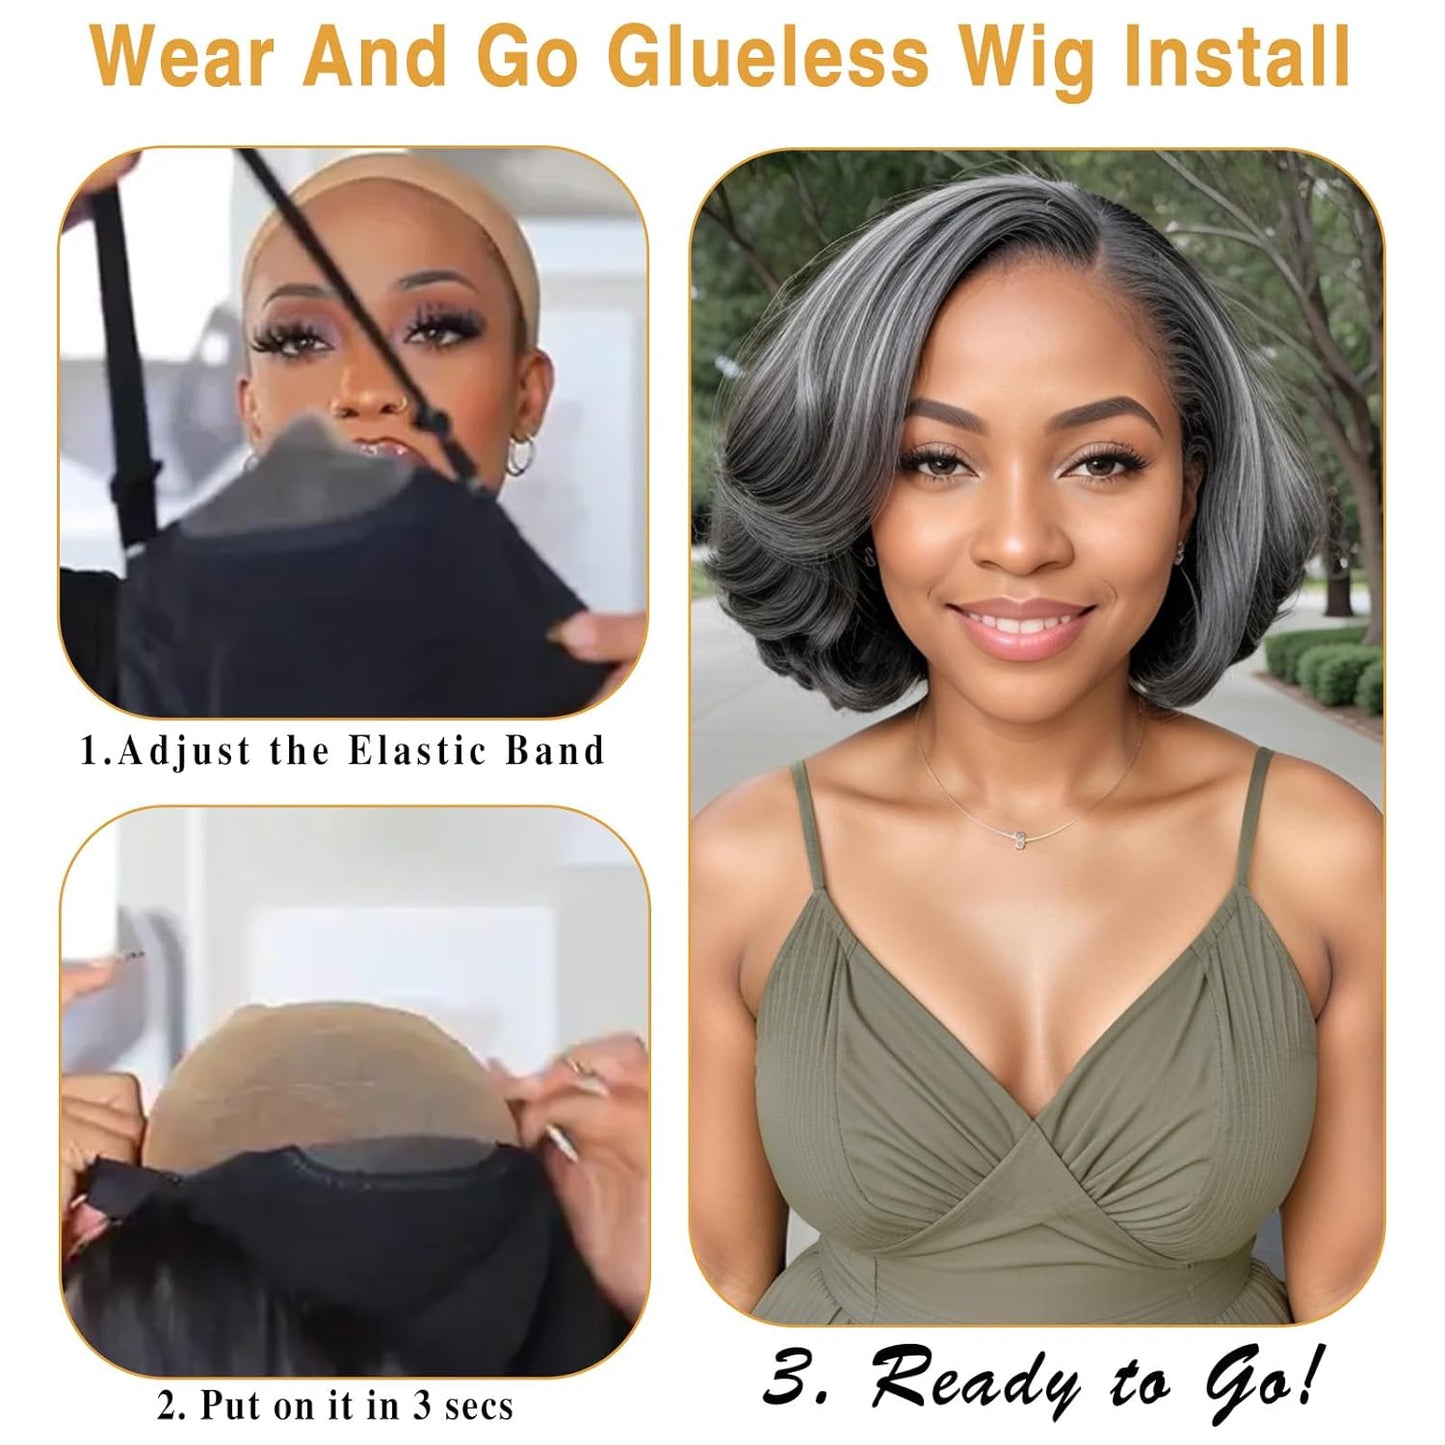 Salt and Pepper Wigs for Women 10" Wear and Go Glueless Bob Wigs Human Hair Pre Plucked Grey Short Bob Wig Body Wave Lace Front Wigs Pre Cut 5x5 Closure HD Transparent Glueless Wigs for Women